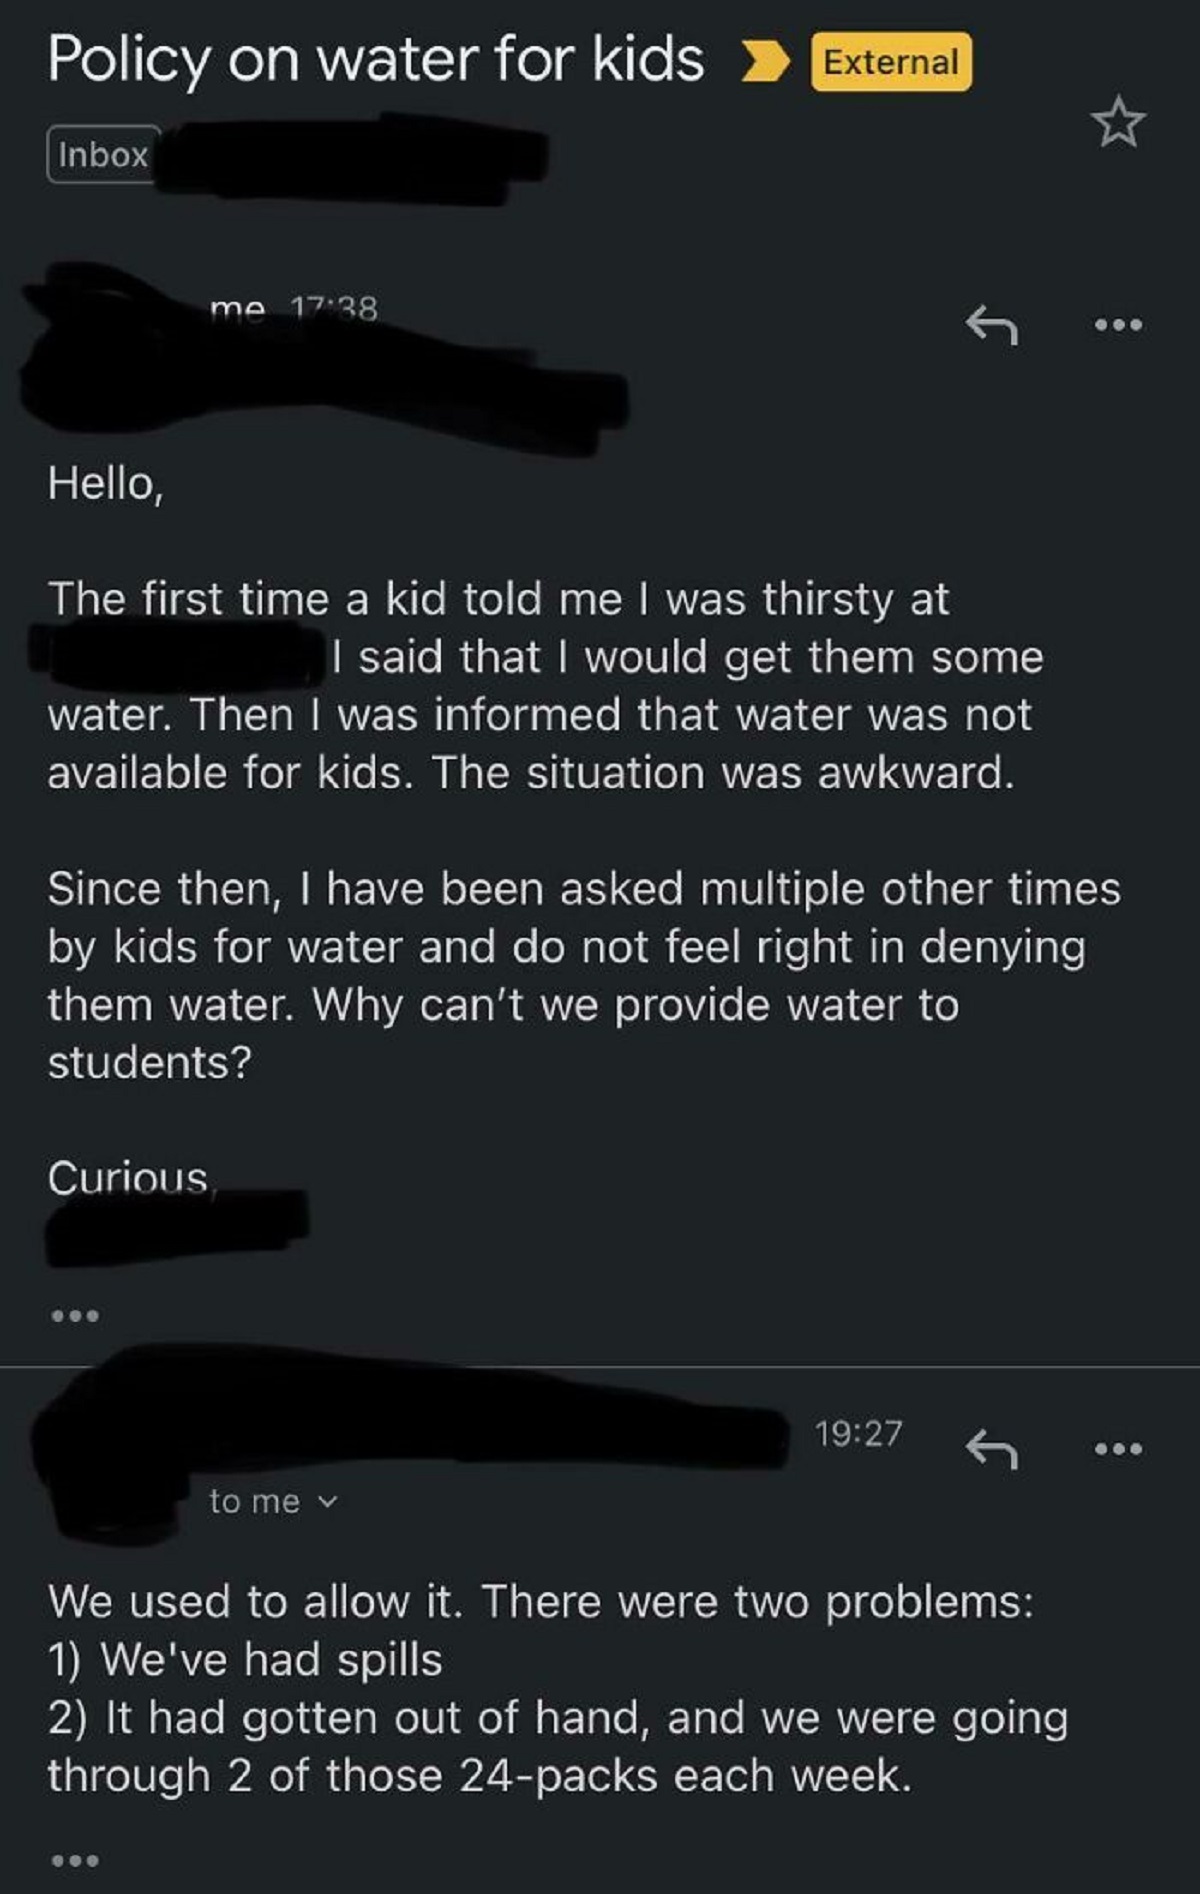 screenshot - Policy on water for kids Inbox me External Hello, The first time a kid told me I was thirsty at I said that I would get them some water. Then I was informed that water was not available for kids. The situation was awkward. Since then, I have 